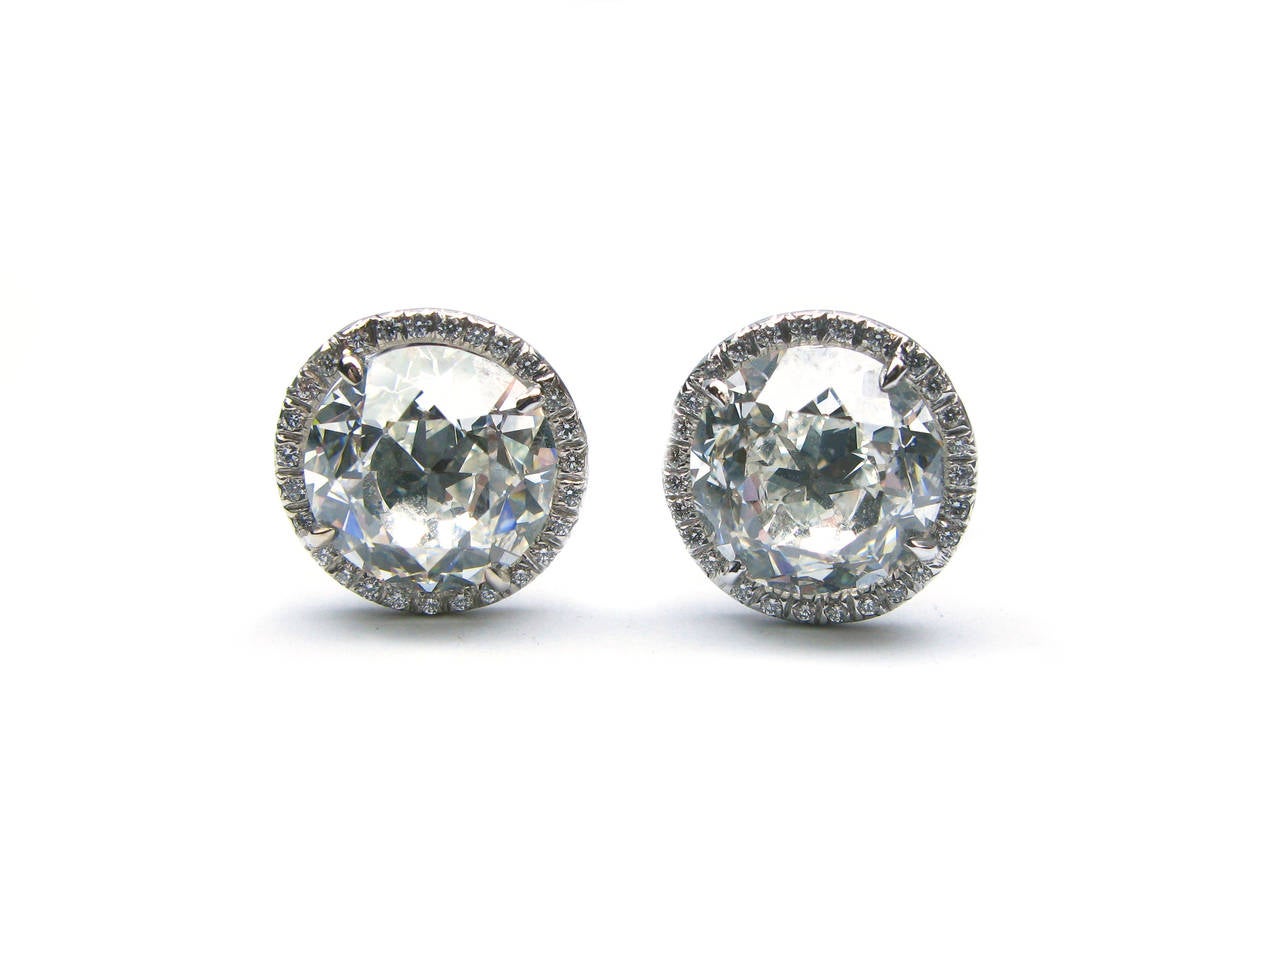 This spectacular pair of 18kt white gold diamond stud earrings features a GIA certified 4.40ct, H color, VS1 clarity Old European cut diamond and a GIA certified 4.58ct, H color, SI1 clarity Old European cut diamond with 0.21ctw diamond pave frames.